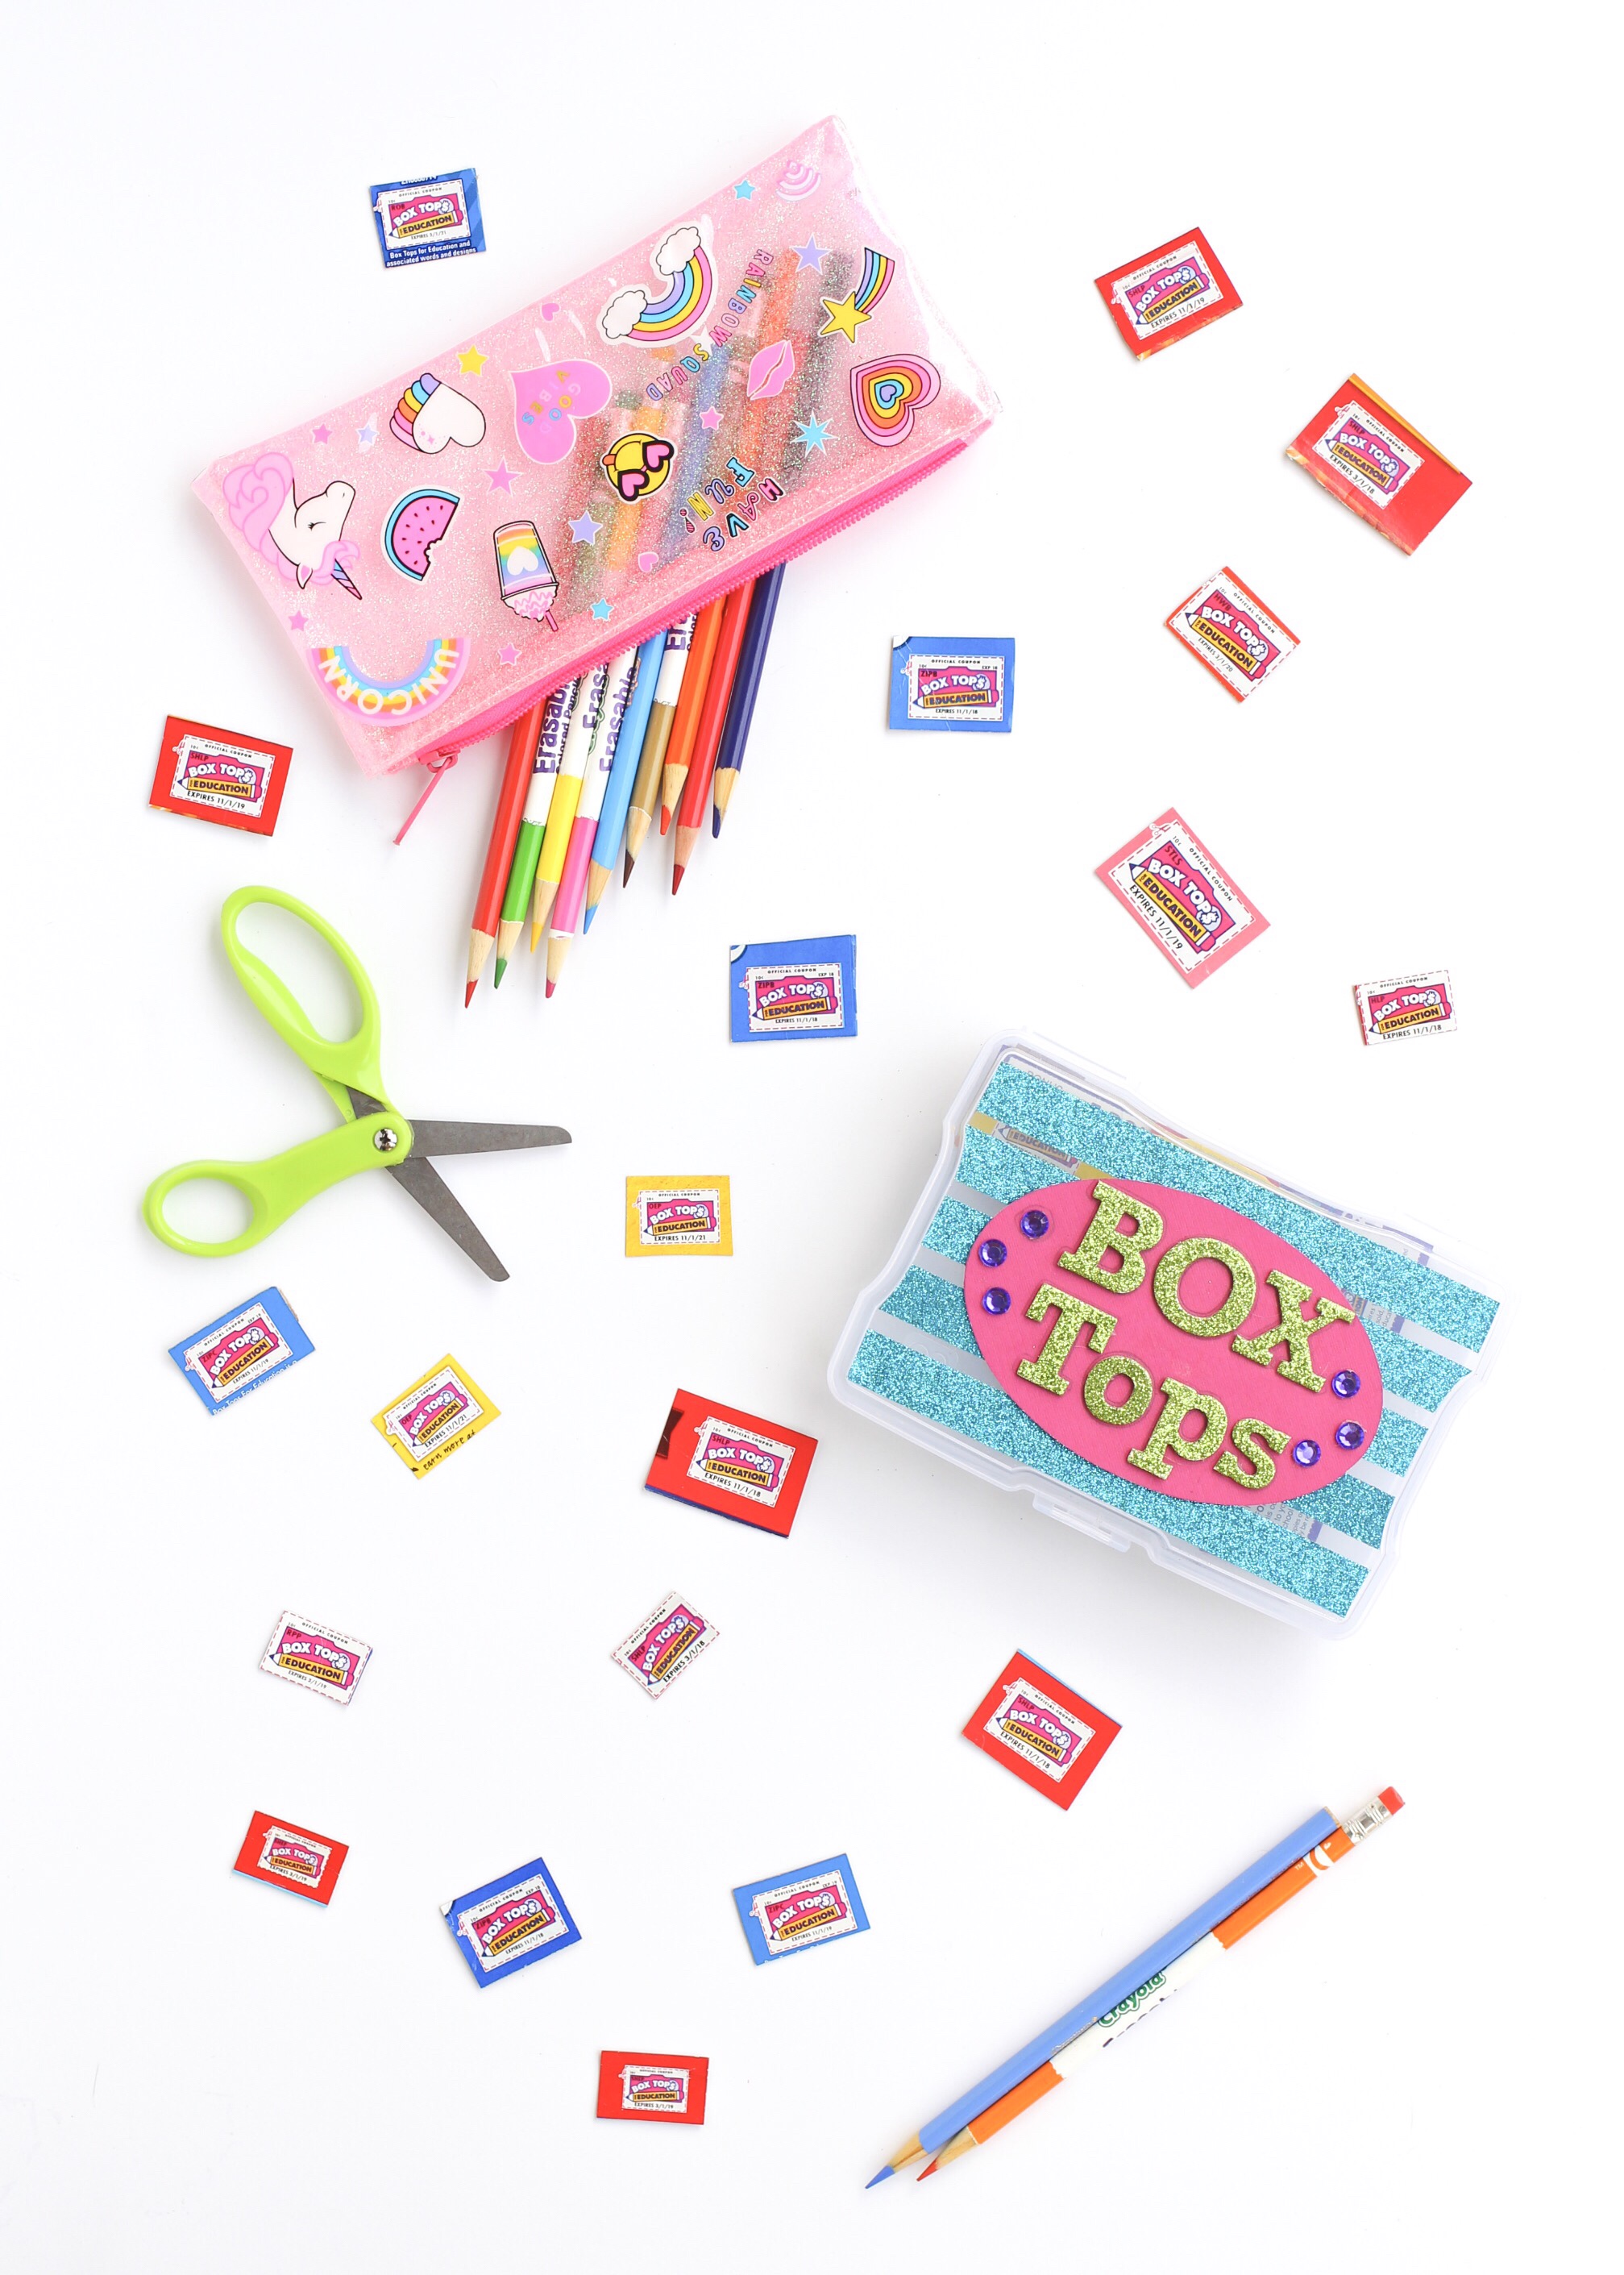 shop-scan-to-earn-box-tops-for-education-young-at-heart-mommy-bloglovin